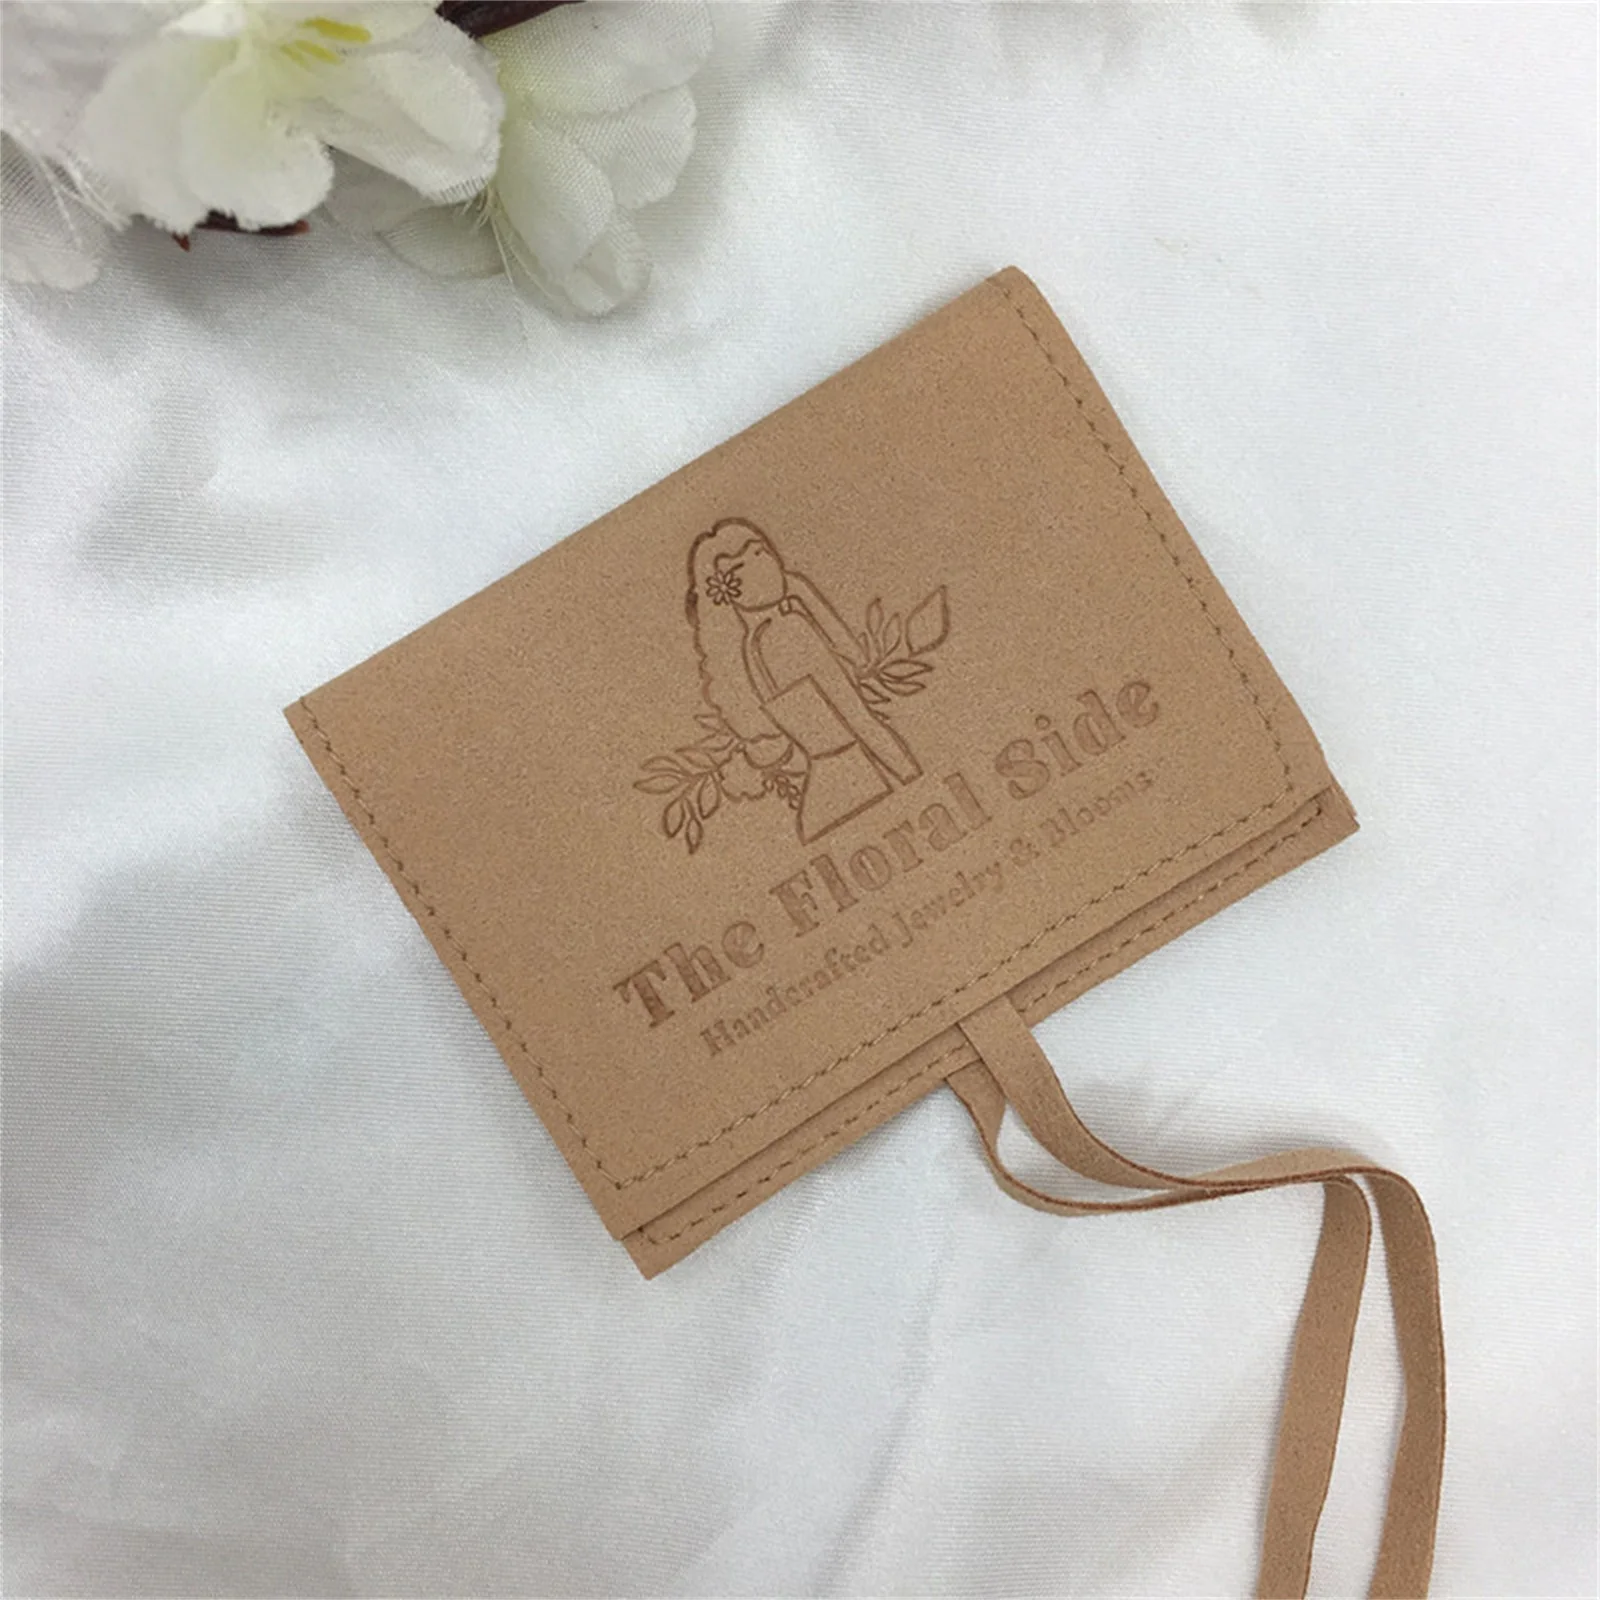 50pcs brown or Khaki personalized jewelry packaging pouch custom logo envelope bag chic small envelope pouch mirofiber pouch bag